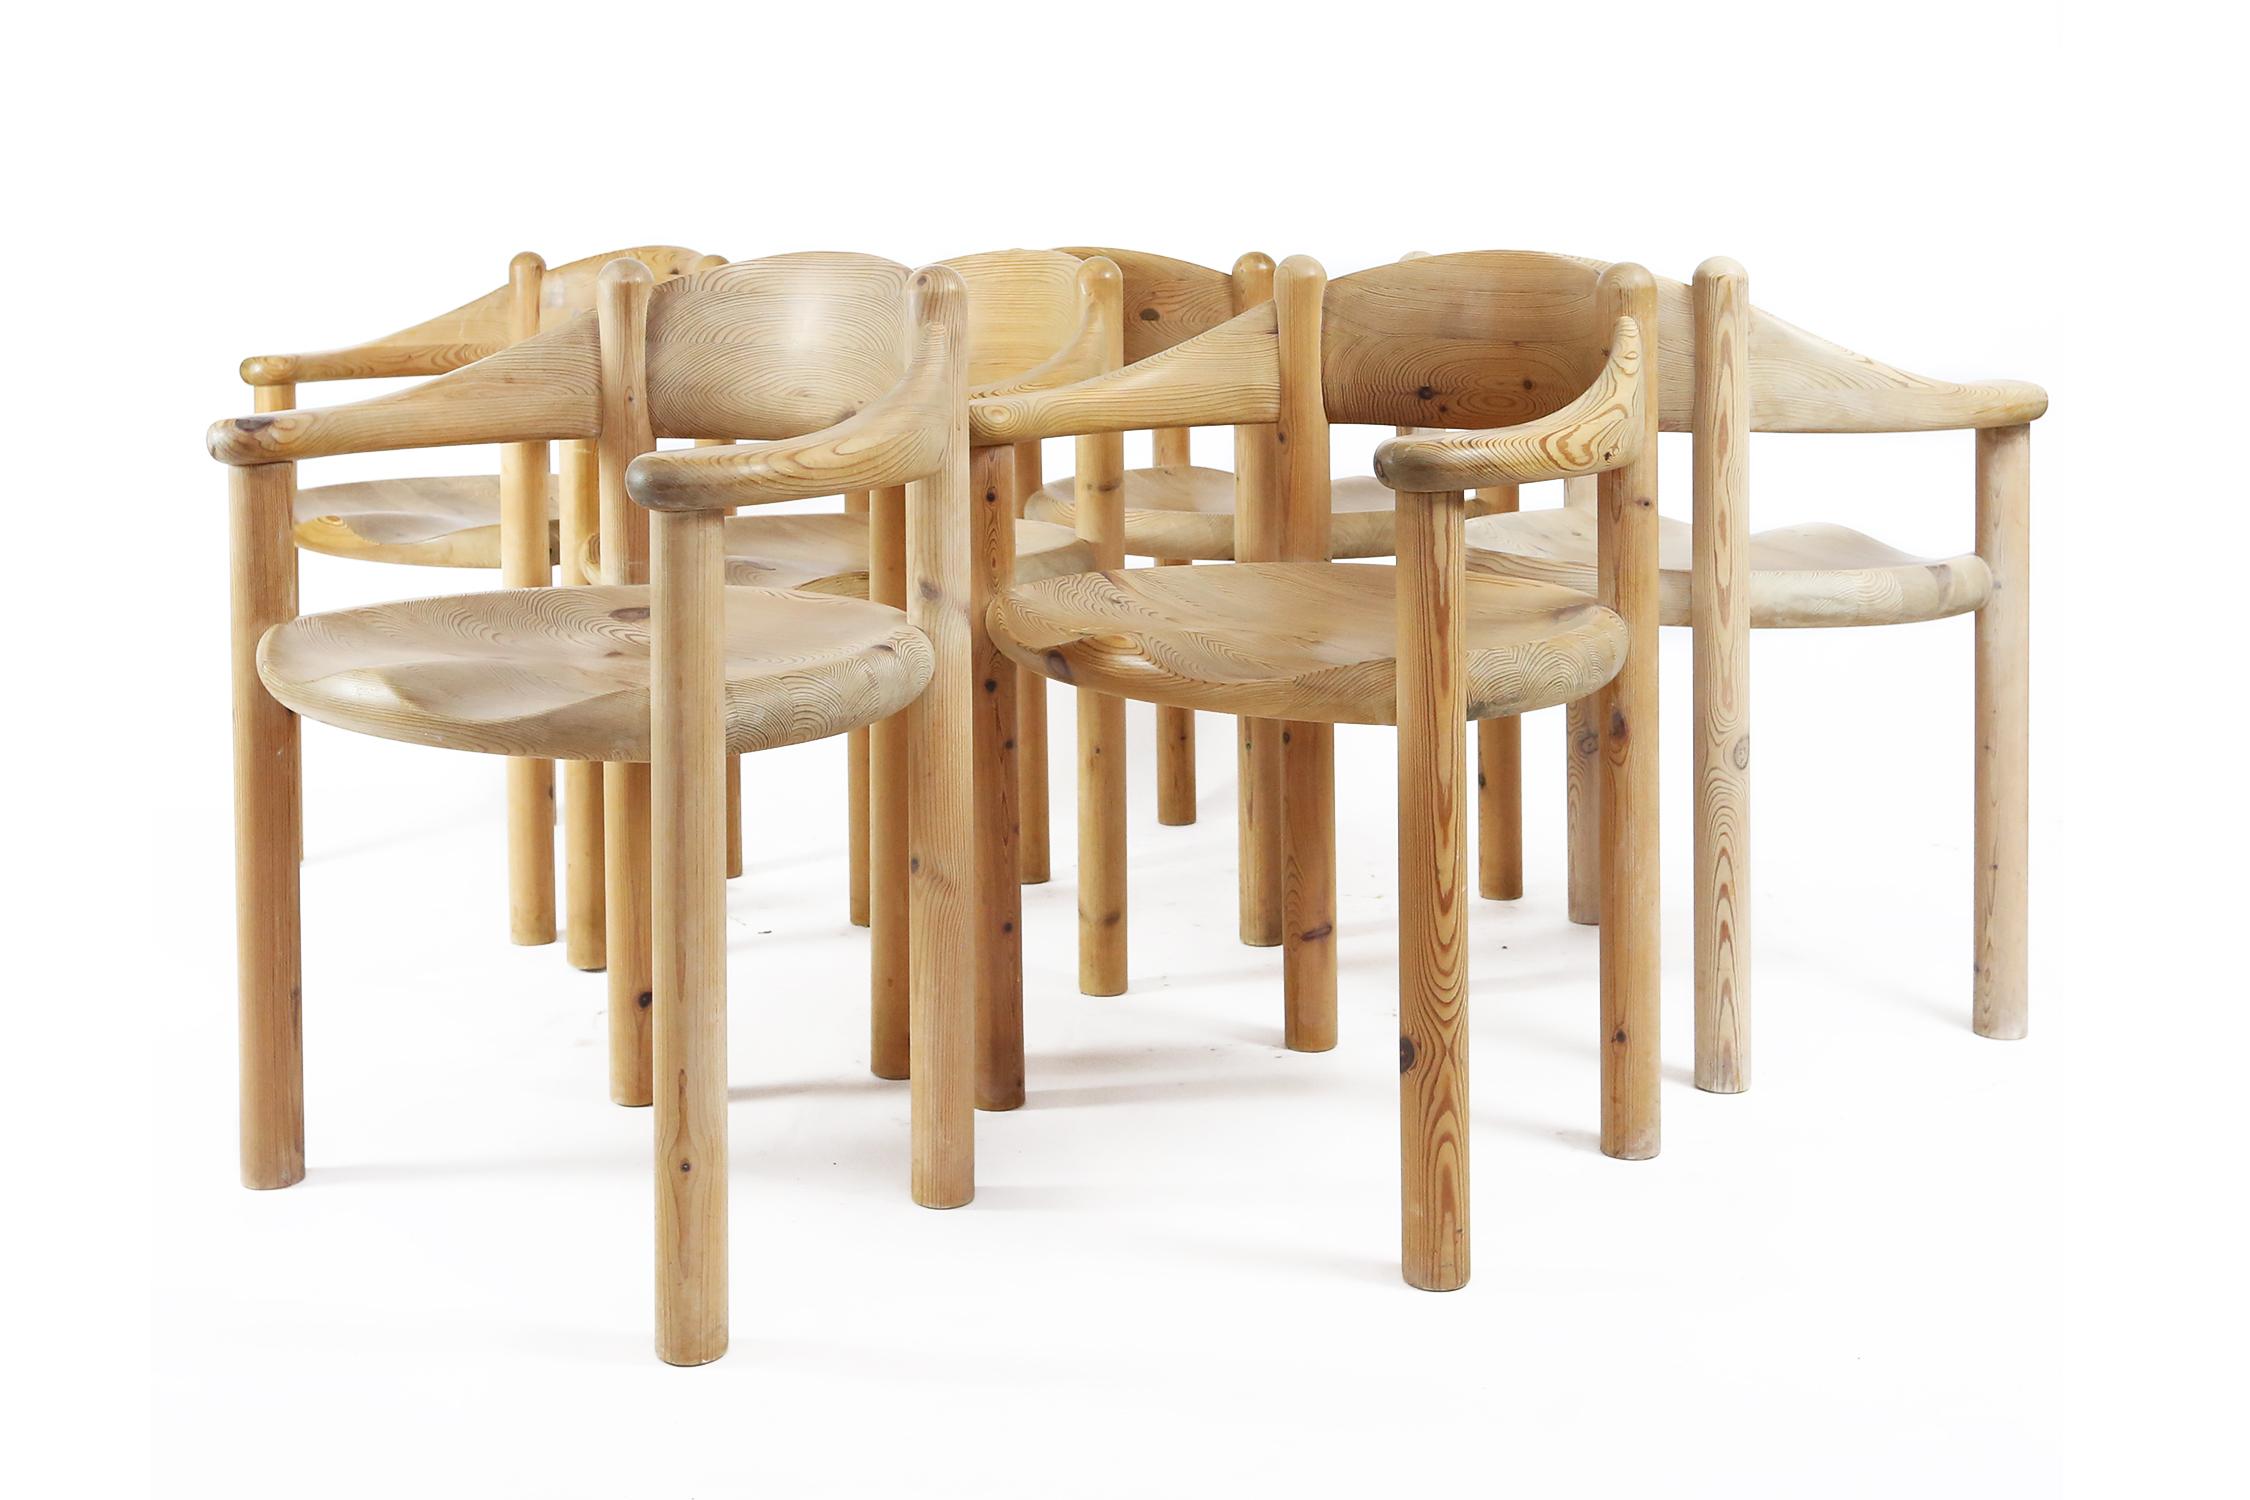 Wonderful set of six very sculptural dining room chairs in pine wood by Swedish designer Rainer Daumiller, manufactured by Hirtshals Savaerk in Denmark. Notice the beautifully carved organic lines of the seats and the general natural feel of the